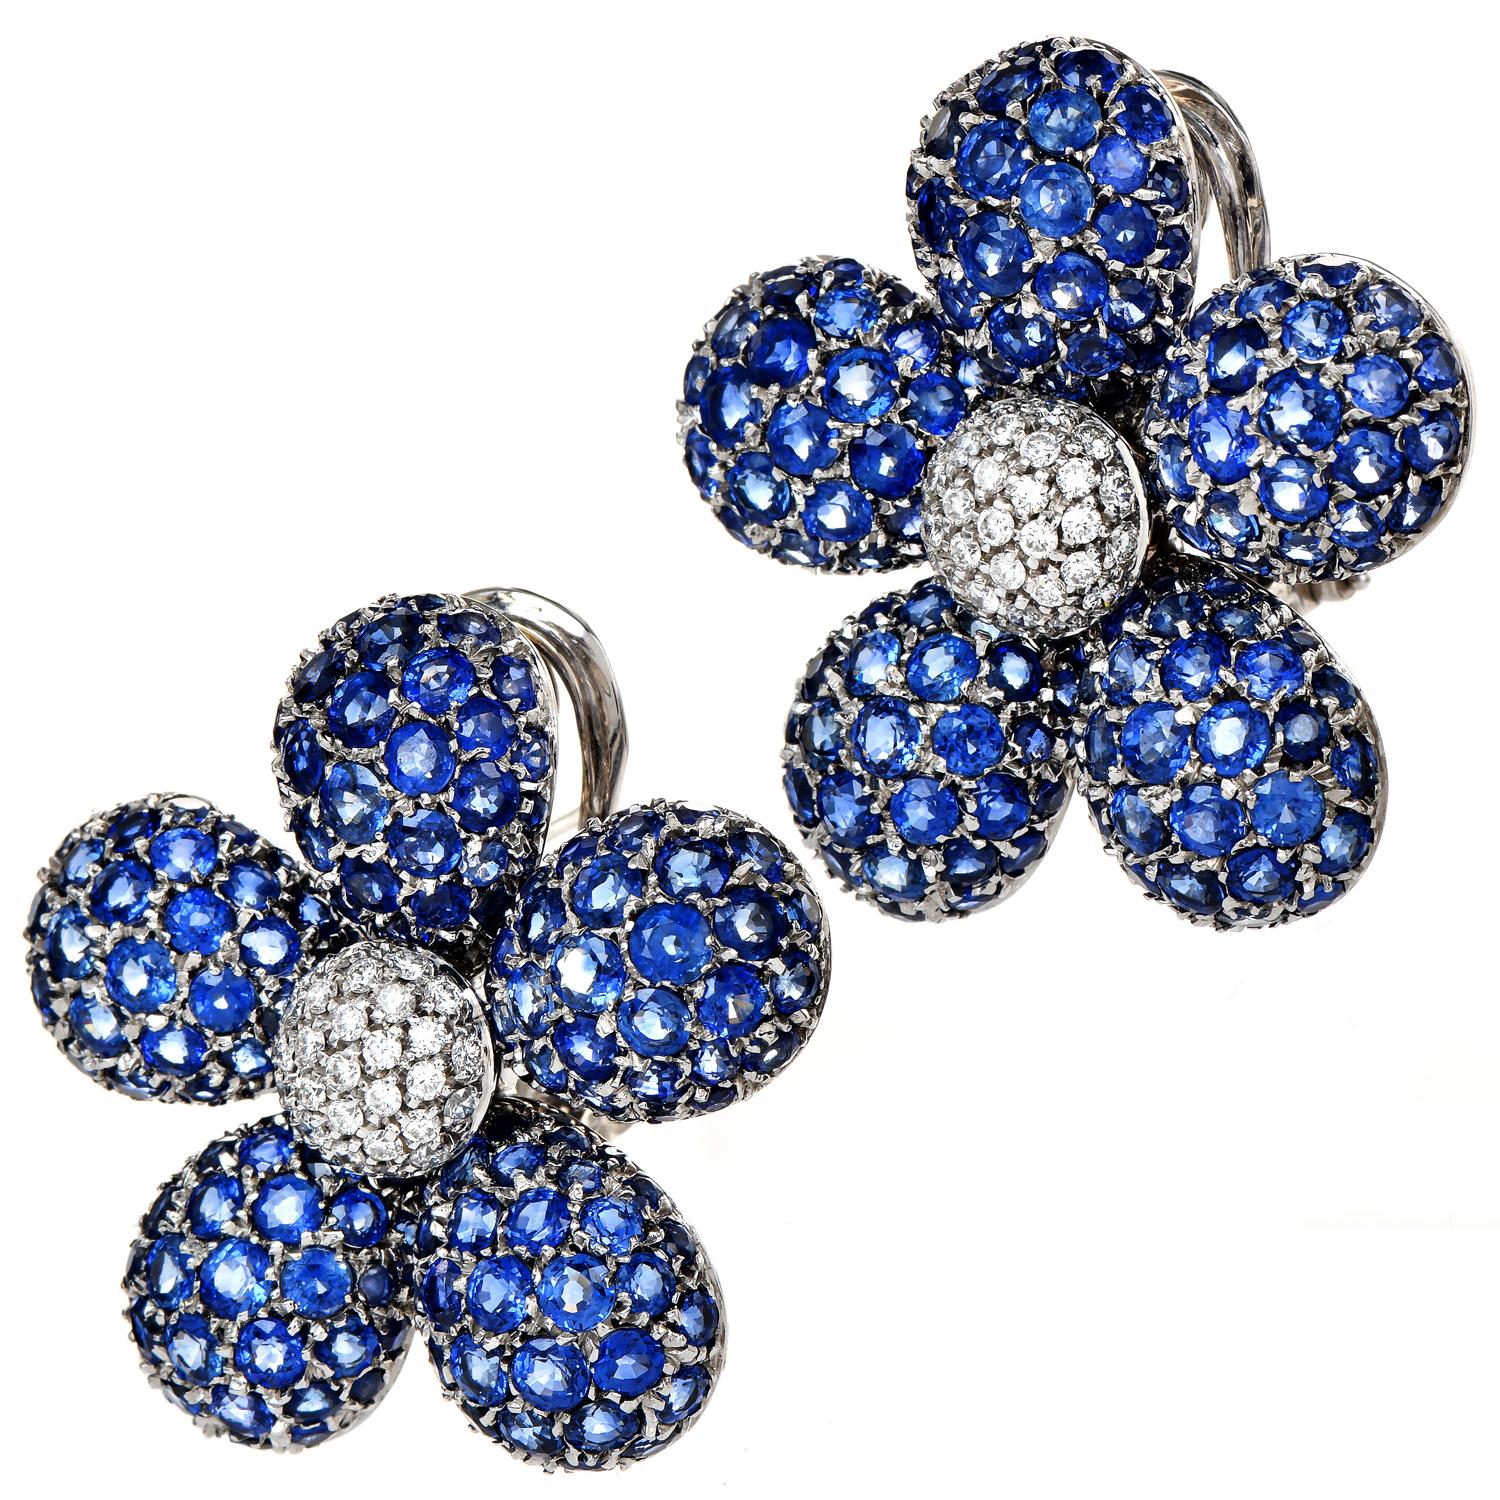 These Stylish 18K White Gold, Pave Diamond & Sapphire Earrings were

inspired by a five-petal Spring Flower motif.

The center is brightened by (58) Genuine Diamonds, weighing collectively 1.06 carats in total, G-H color, and VS clarity.

The 10